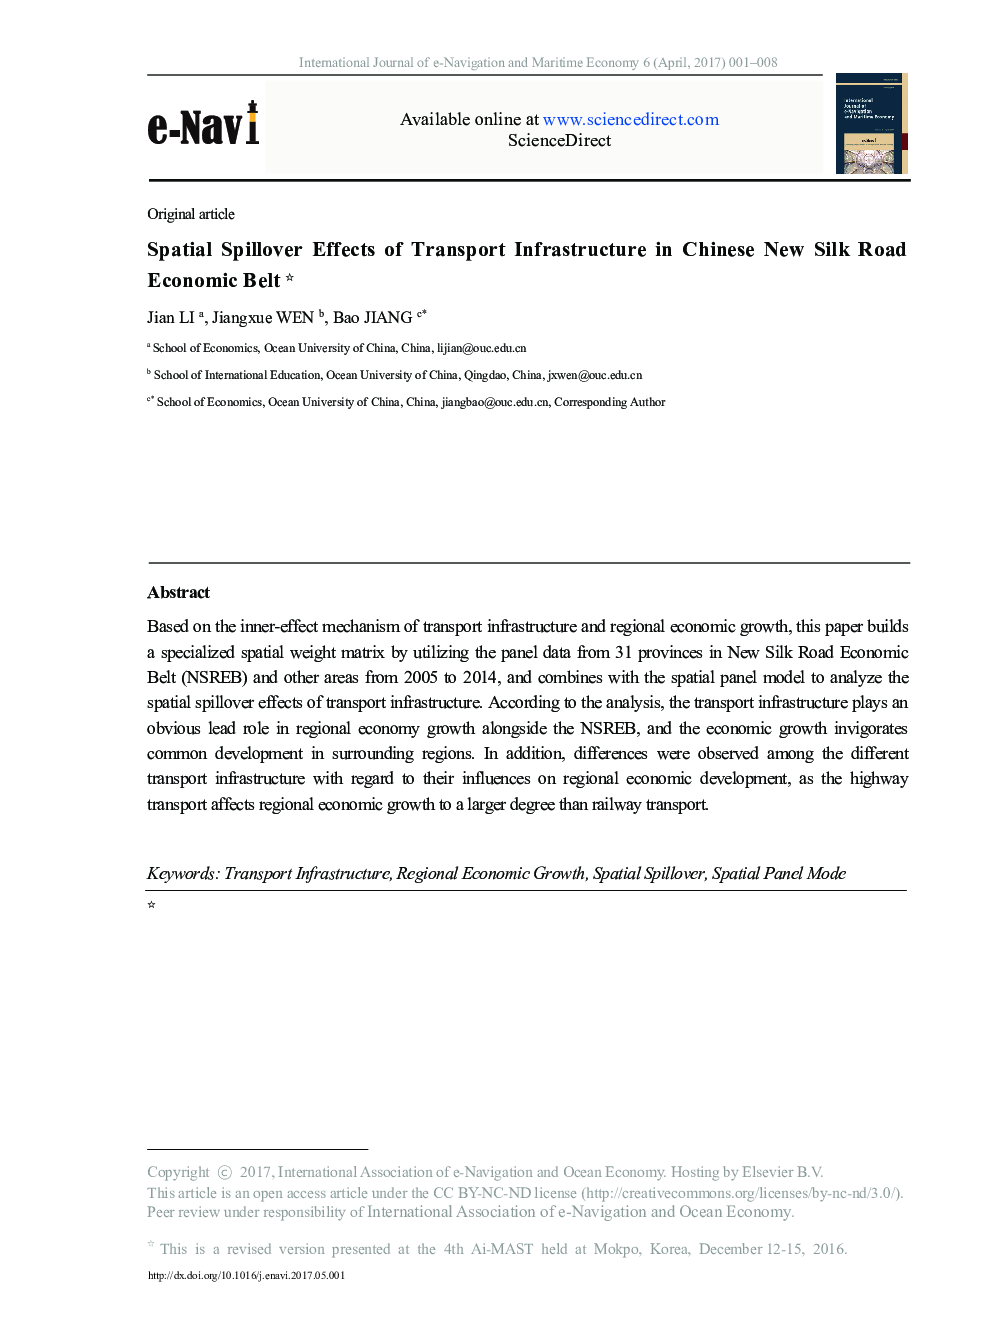 Spatial Spillover Effects of Transport Infrastructure in Chinese New Silk Road Economic Belt